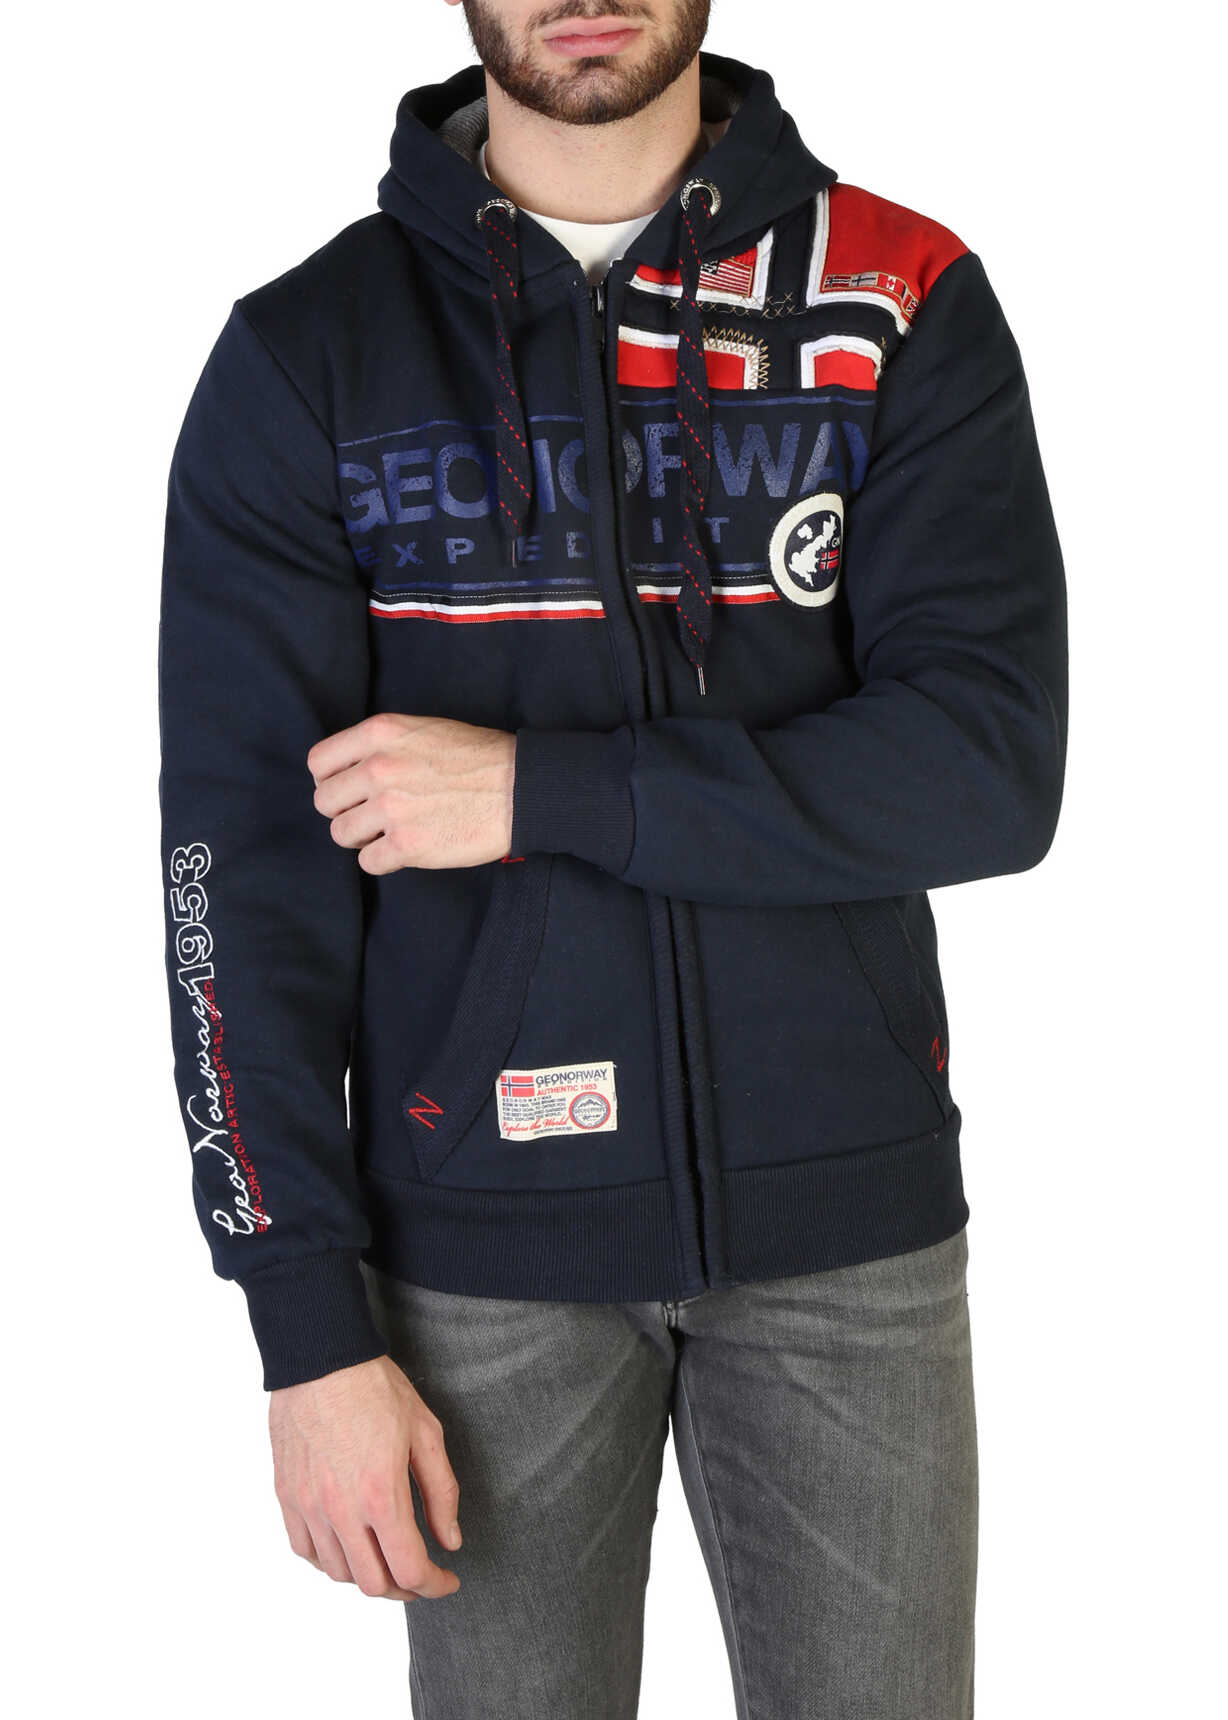 Geographical Norway Flipper_Man BLUE